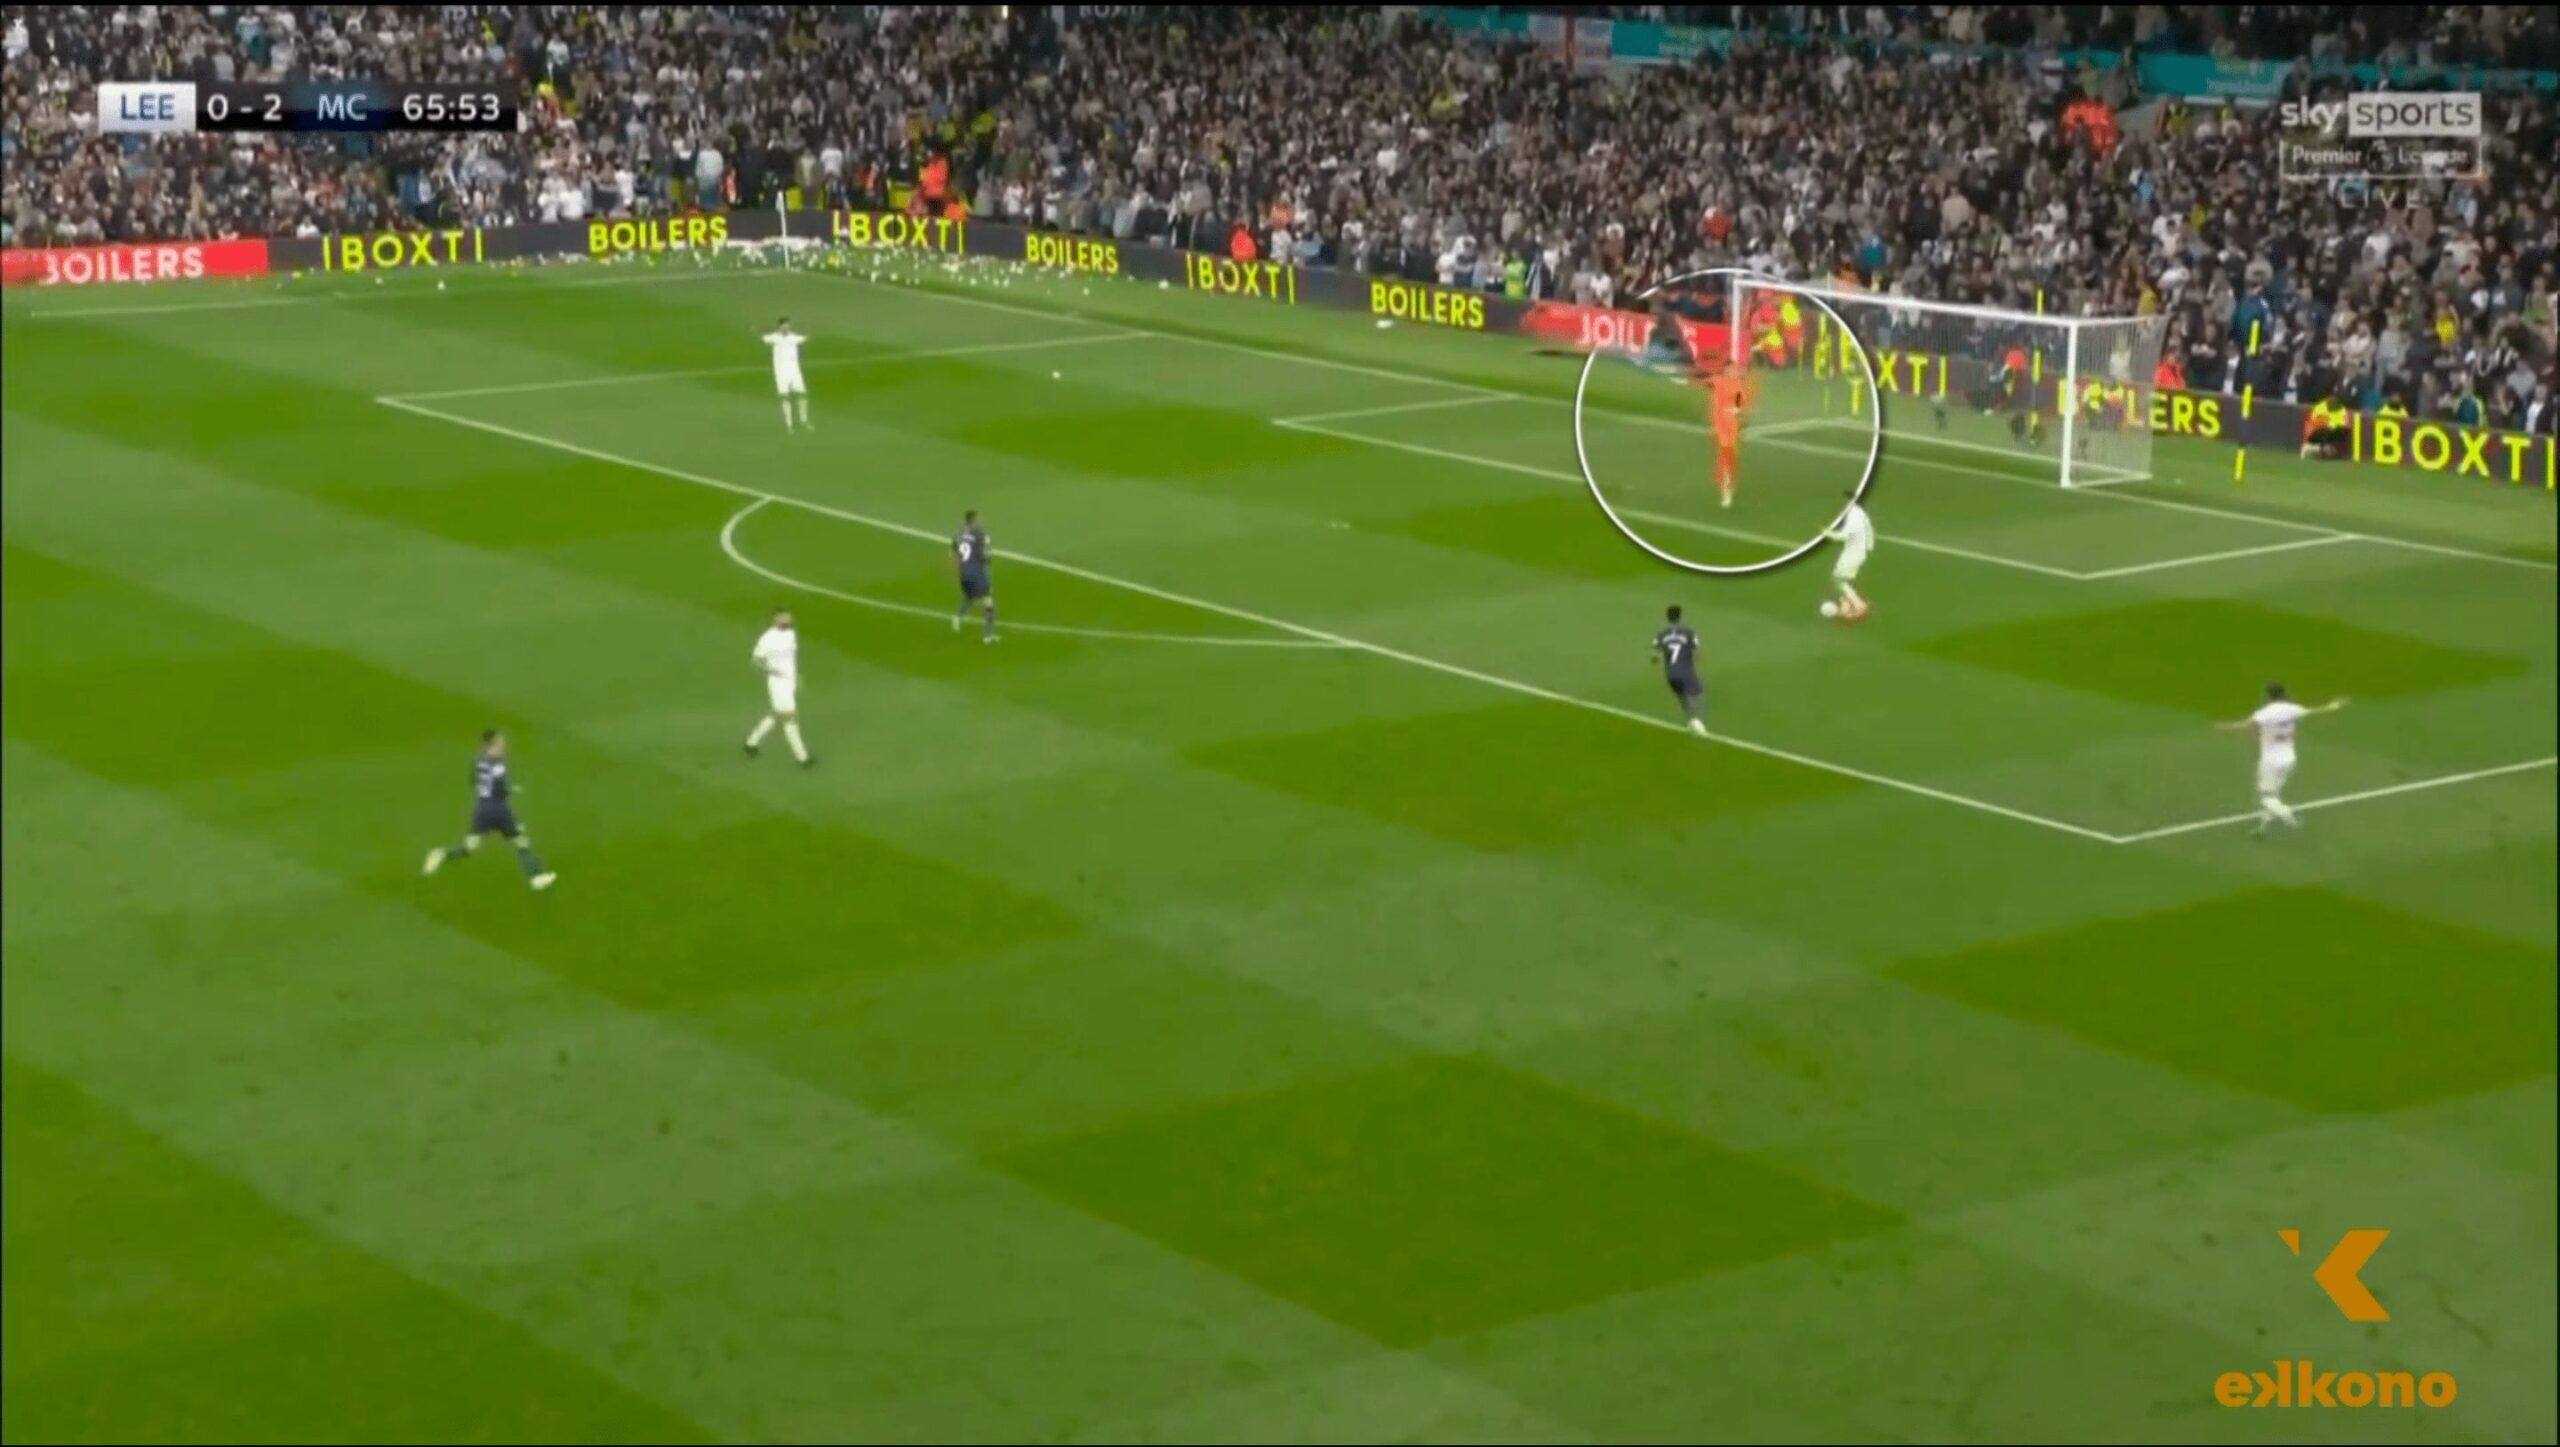 Meslier (Leeds United) shows the way that team can benefit from having a plan. The ball is close to him and he is looking for the teammates who are available to receive the ball.